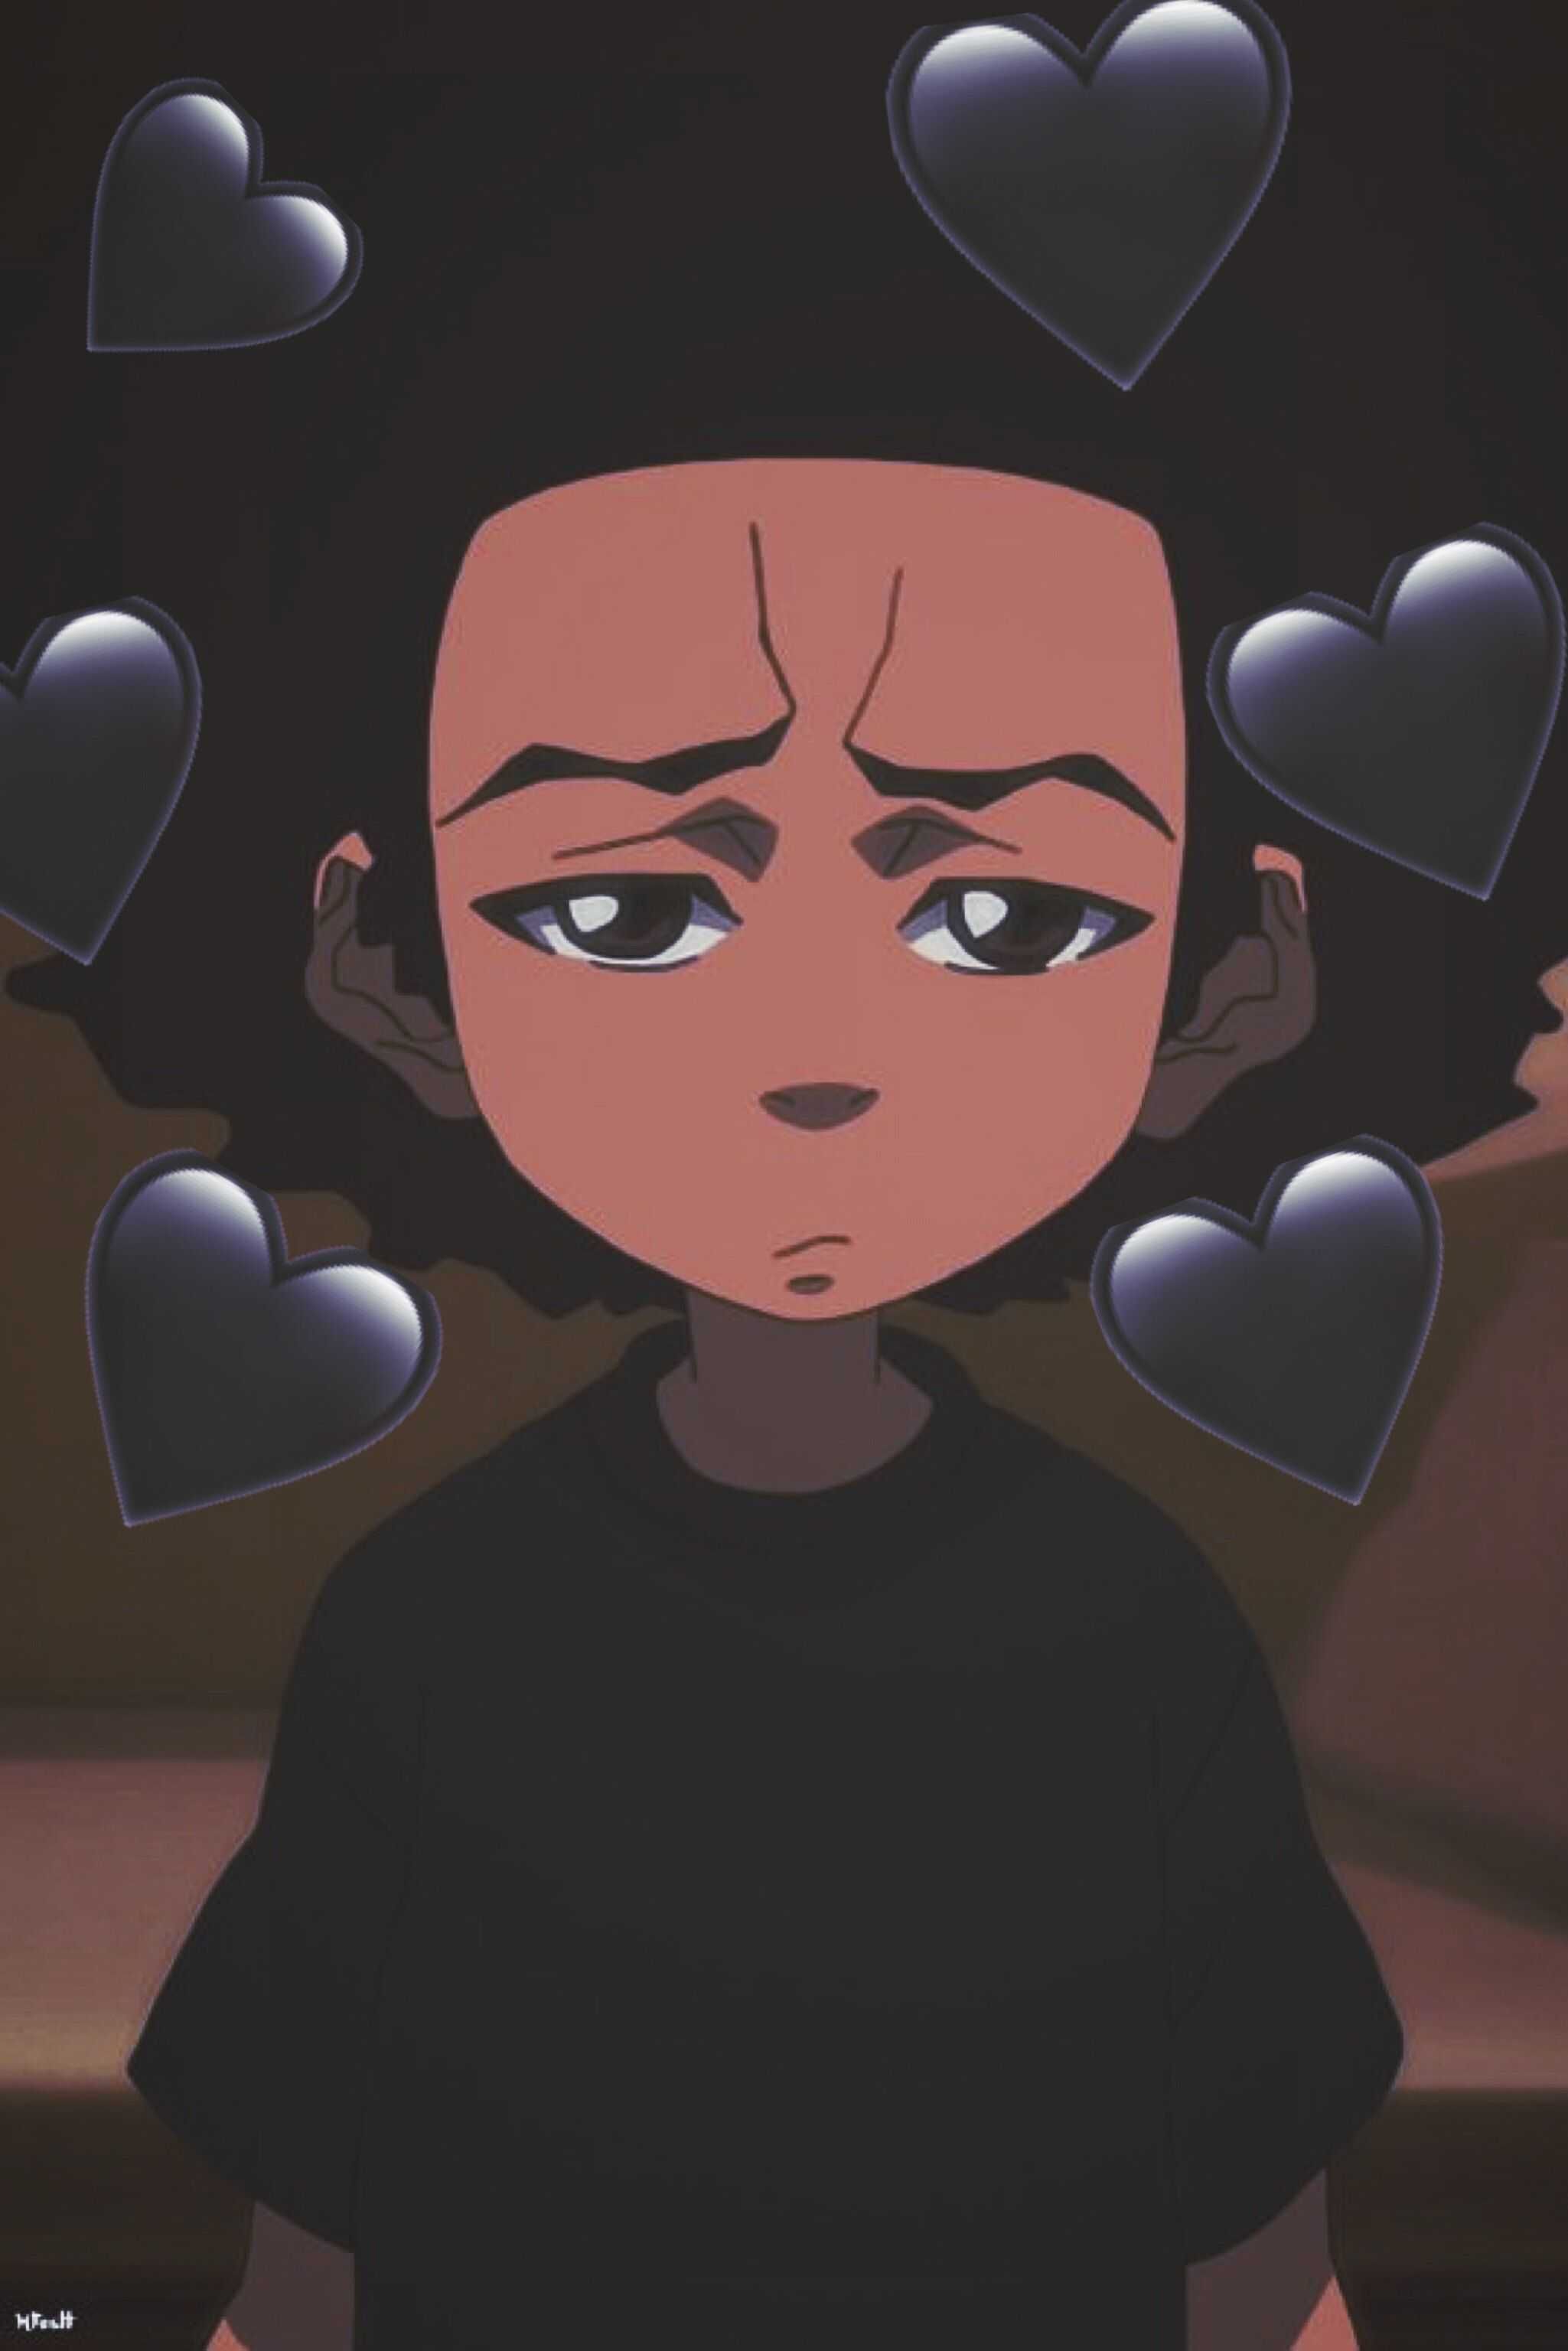 The Boondocks HD Wallpapers and Backgrounds